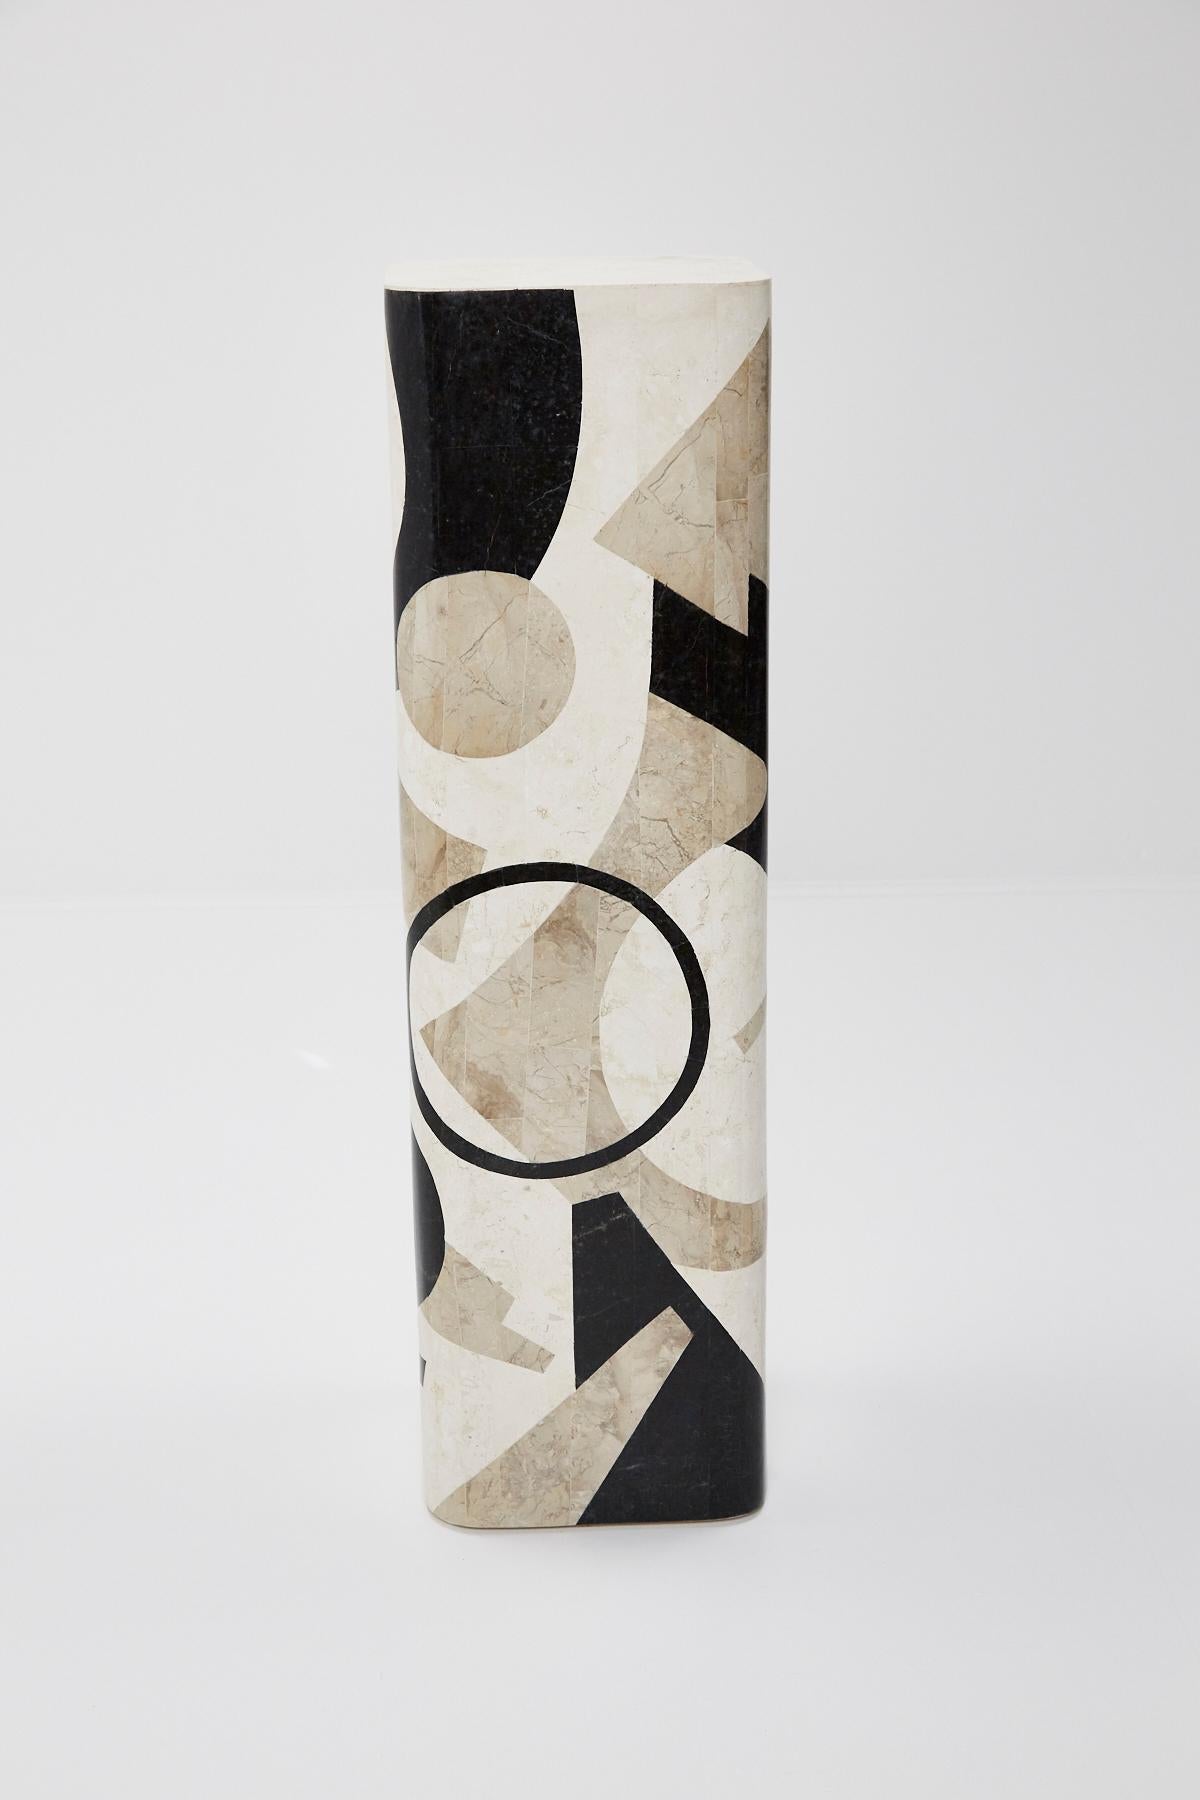 Tessellated stone pedestal. Square in shape with rounded corners. Black, cream and tan stone hand-inlaid over fiberglass body in a fun Postmodern pattern.

Measures: Tall 42 inches.

Pair available.

All furnishings are made from 100% natural Fossil